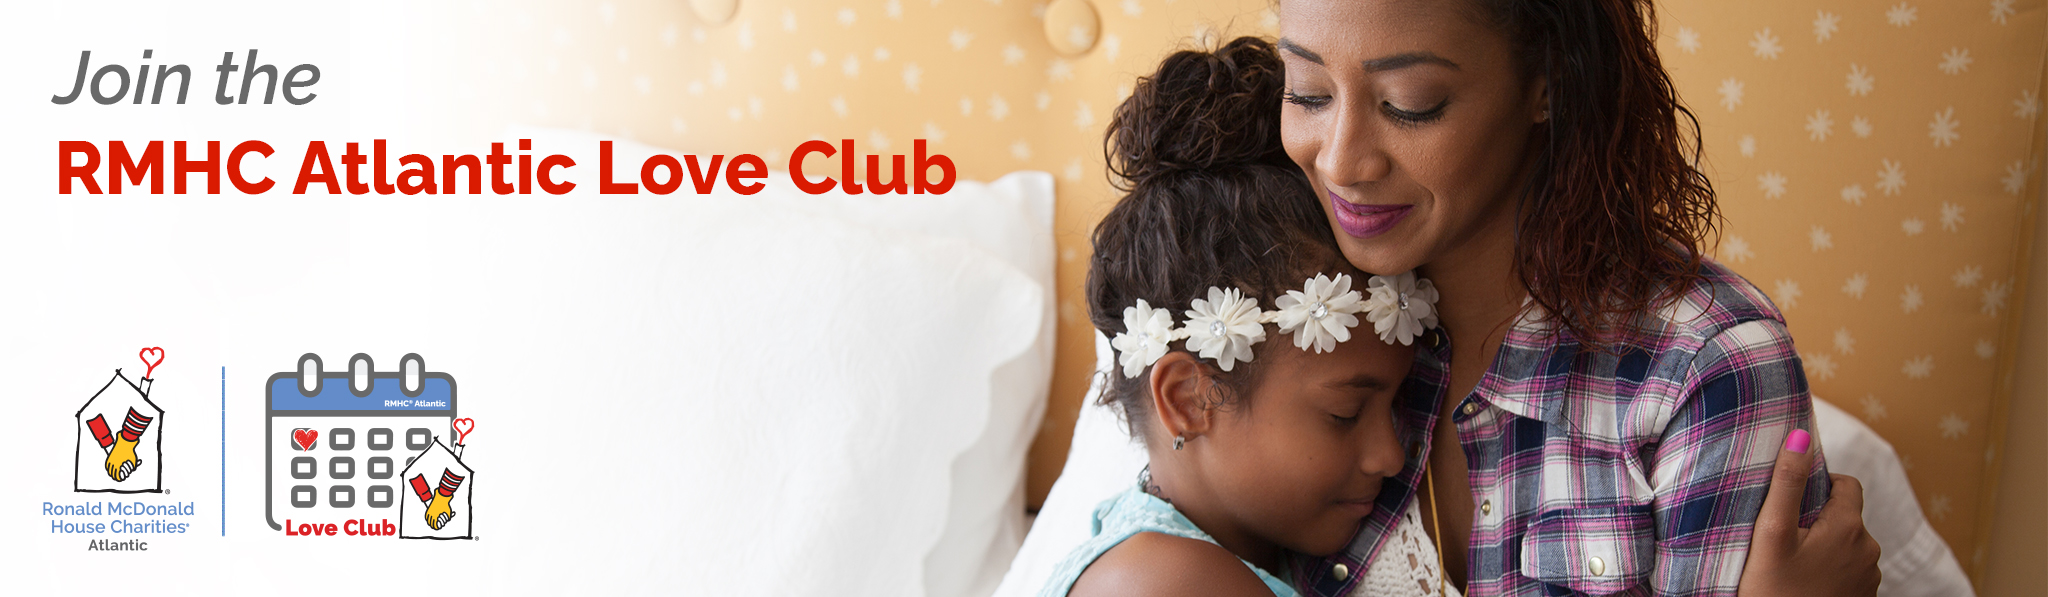 Banner - Join the RMHC Atlantic Love Club